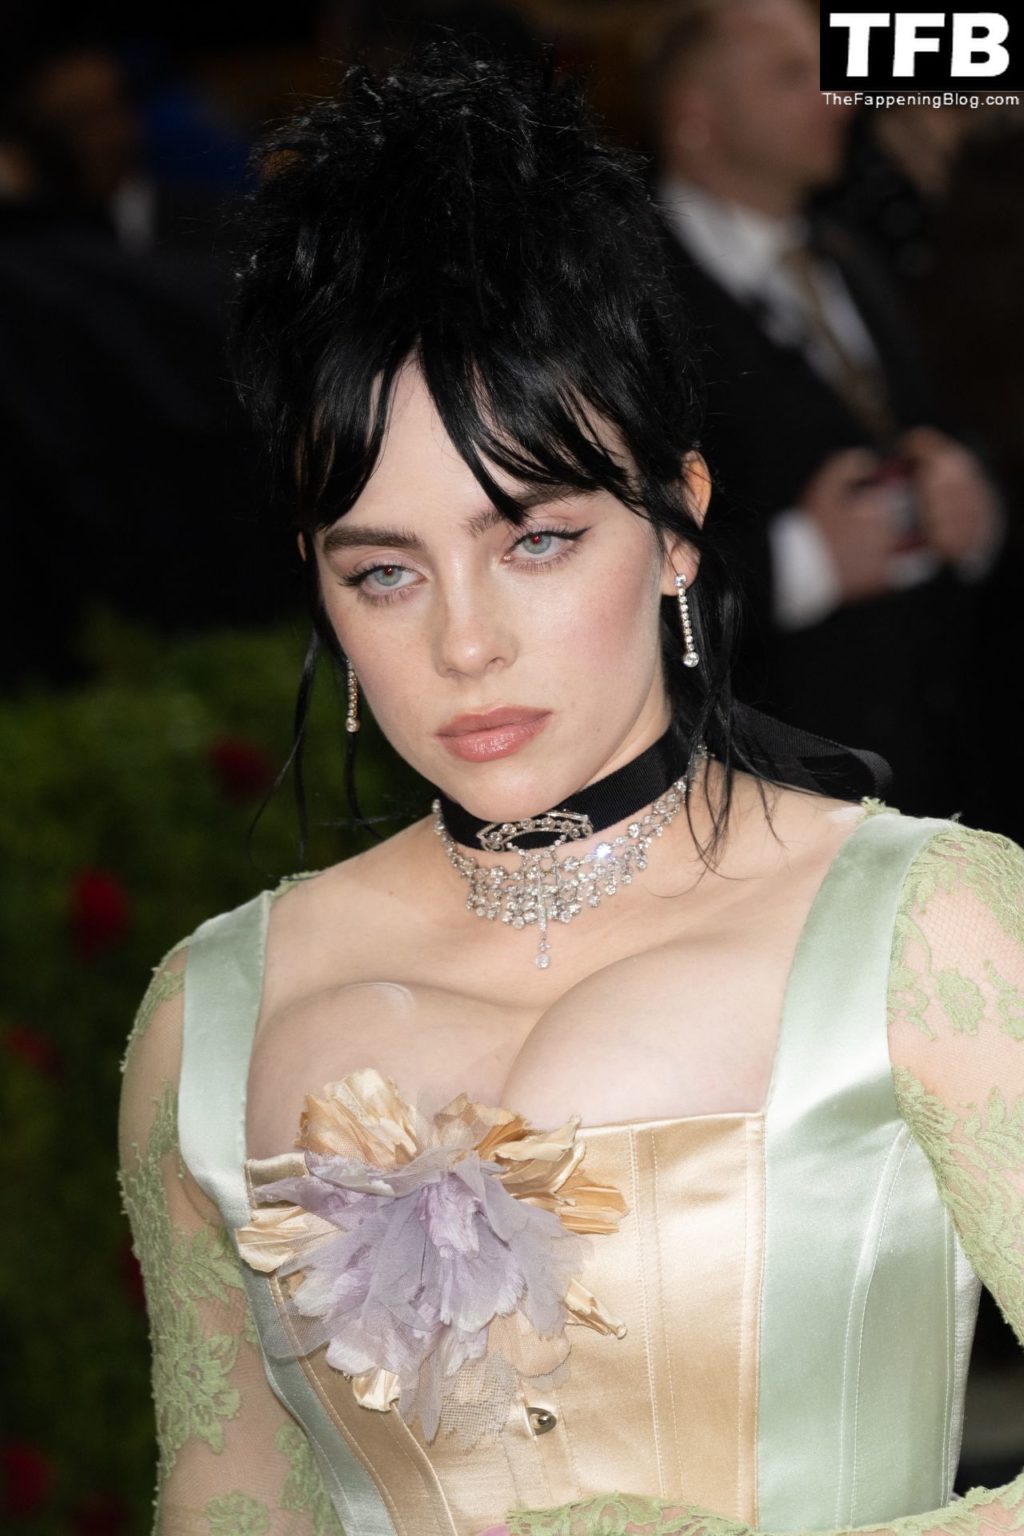 Billie Eilish Sexy The Fappening Blog 31 1024x1536 - Billie Eilish Showcases Nice Cleavage at The 2022 Met Gala in NYC (155 Photos)